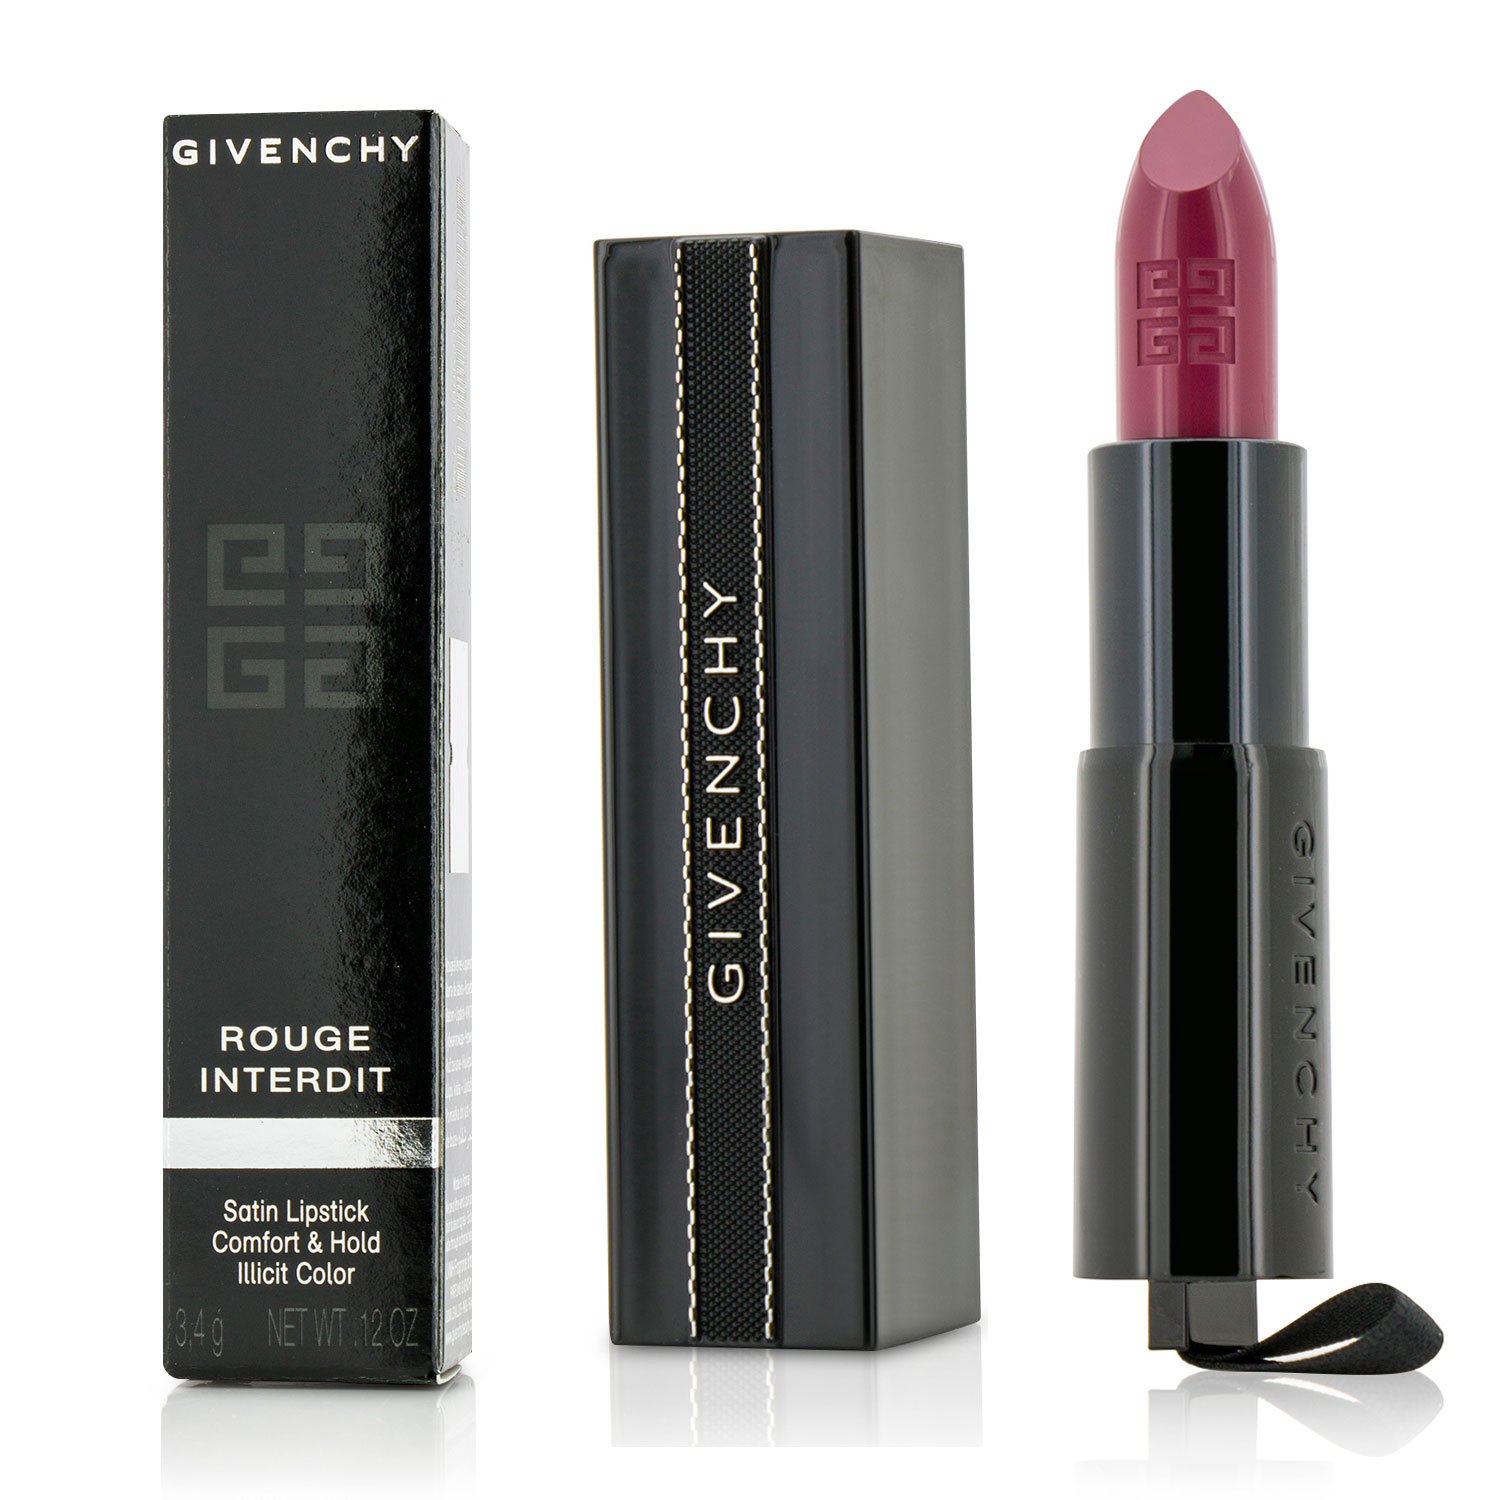 Rouge Interdit Satin Lipstick - # 8 Framboise Obscur Givenchy Image